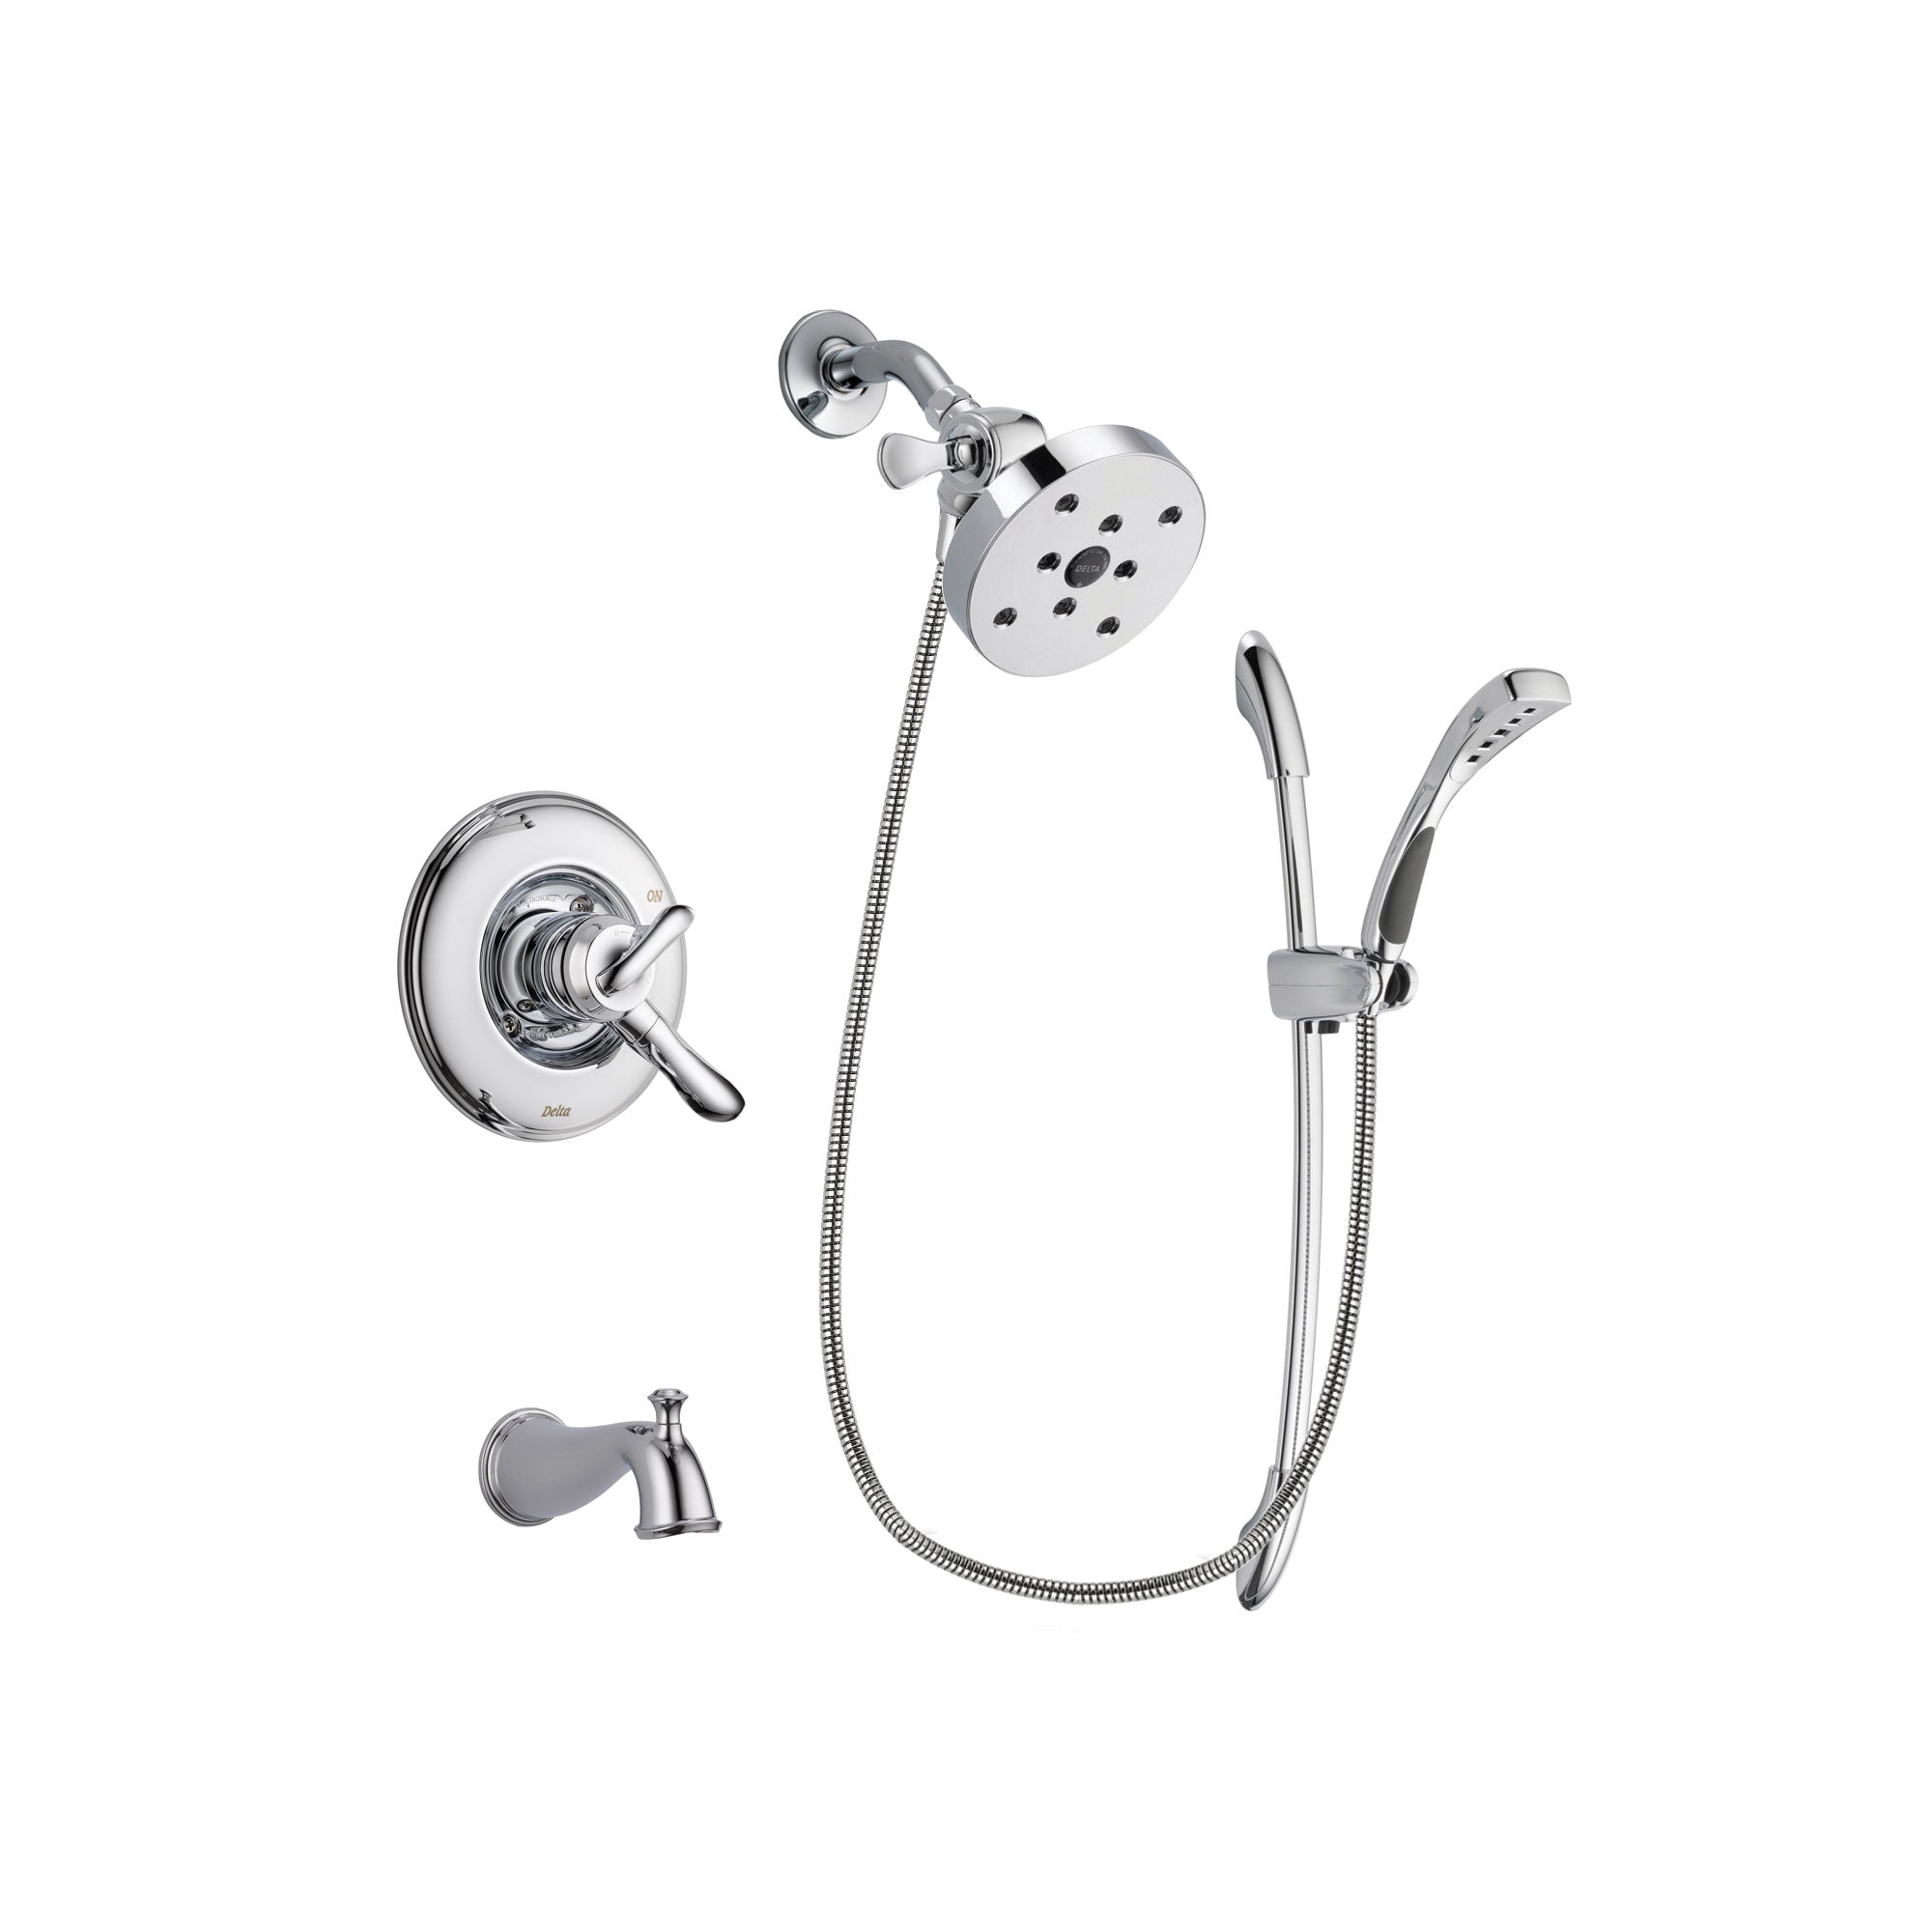 Delta Linden Chrome Finish Dual Control Tub and Shower Faucet System Package with 5-1/2 inch Shower Head and Handheld Shower with Slide Bar Includes Rough-in Valve and Tub Spout DSP0557V